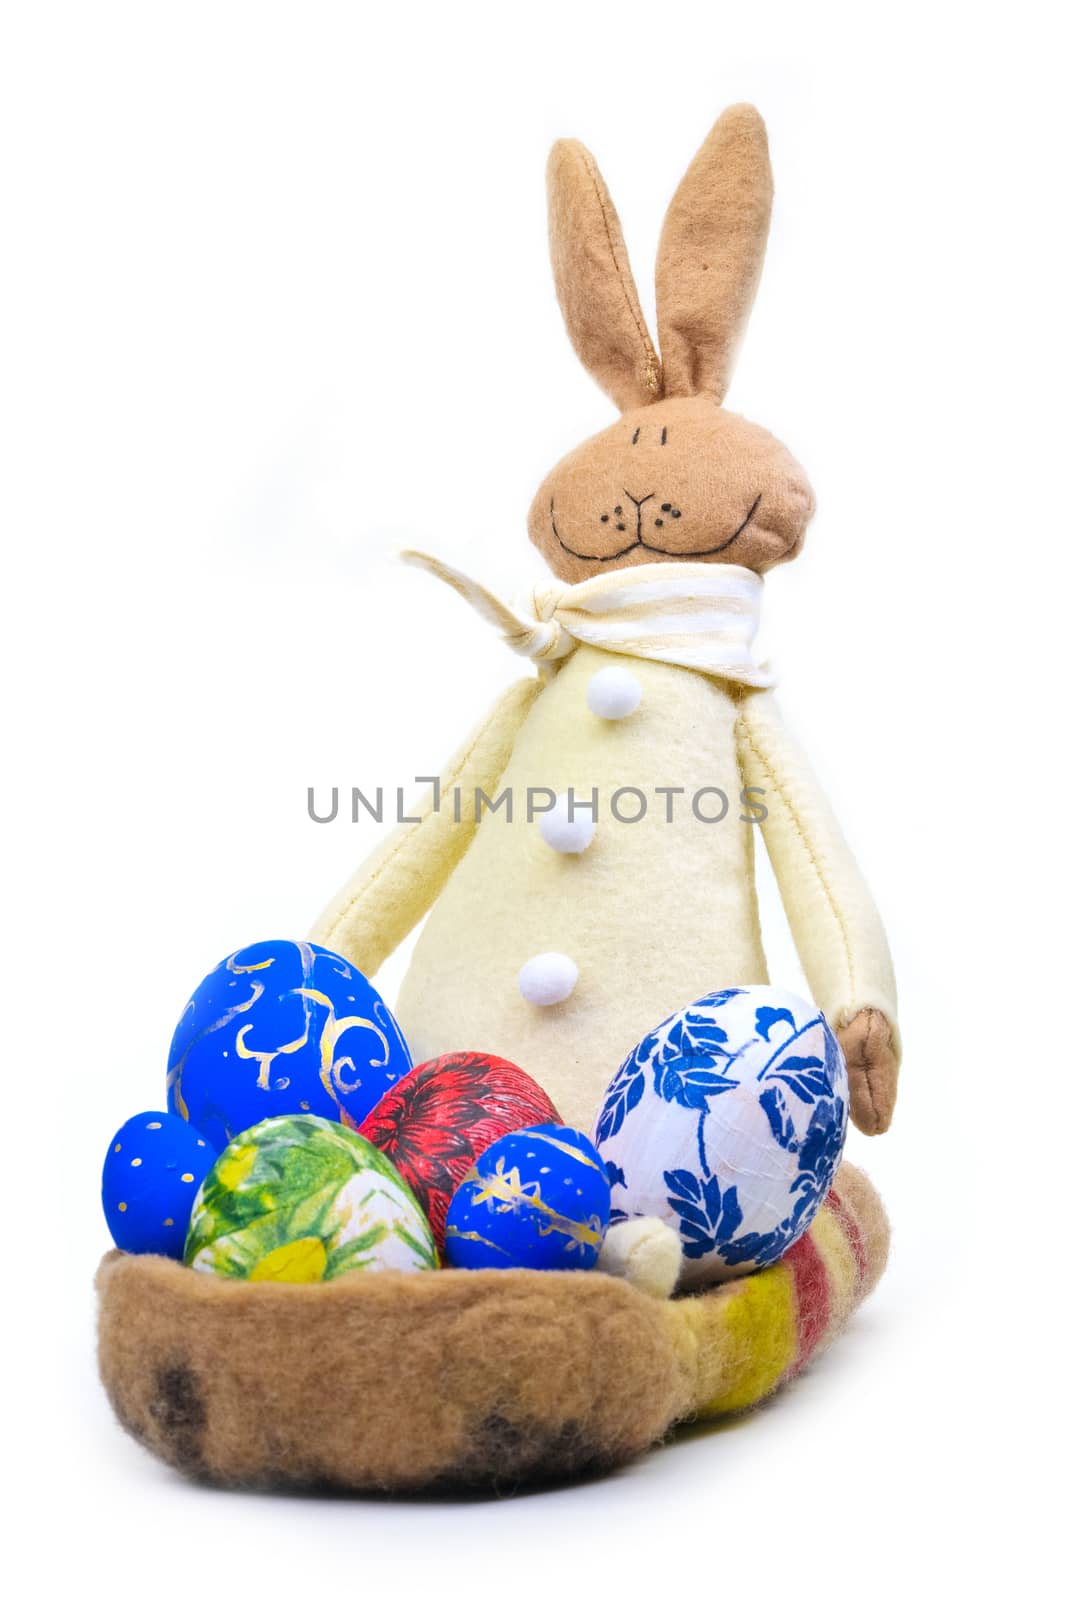 Eggs painted by hand with hare isolated on white background by mrakor